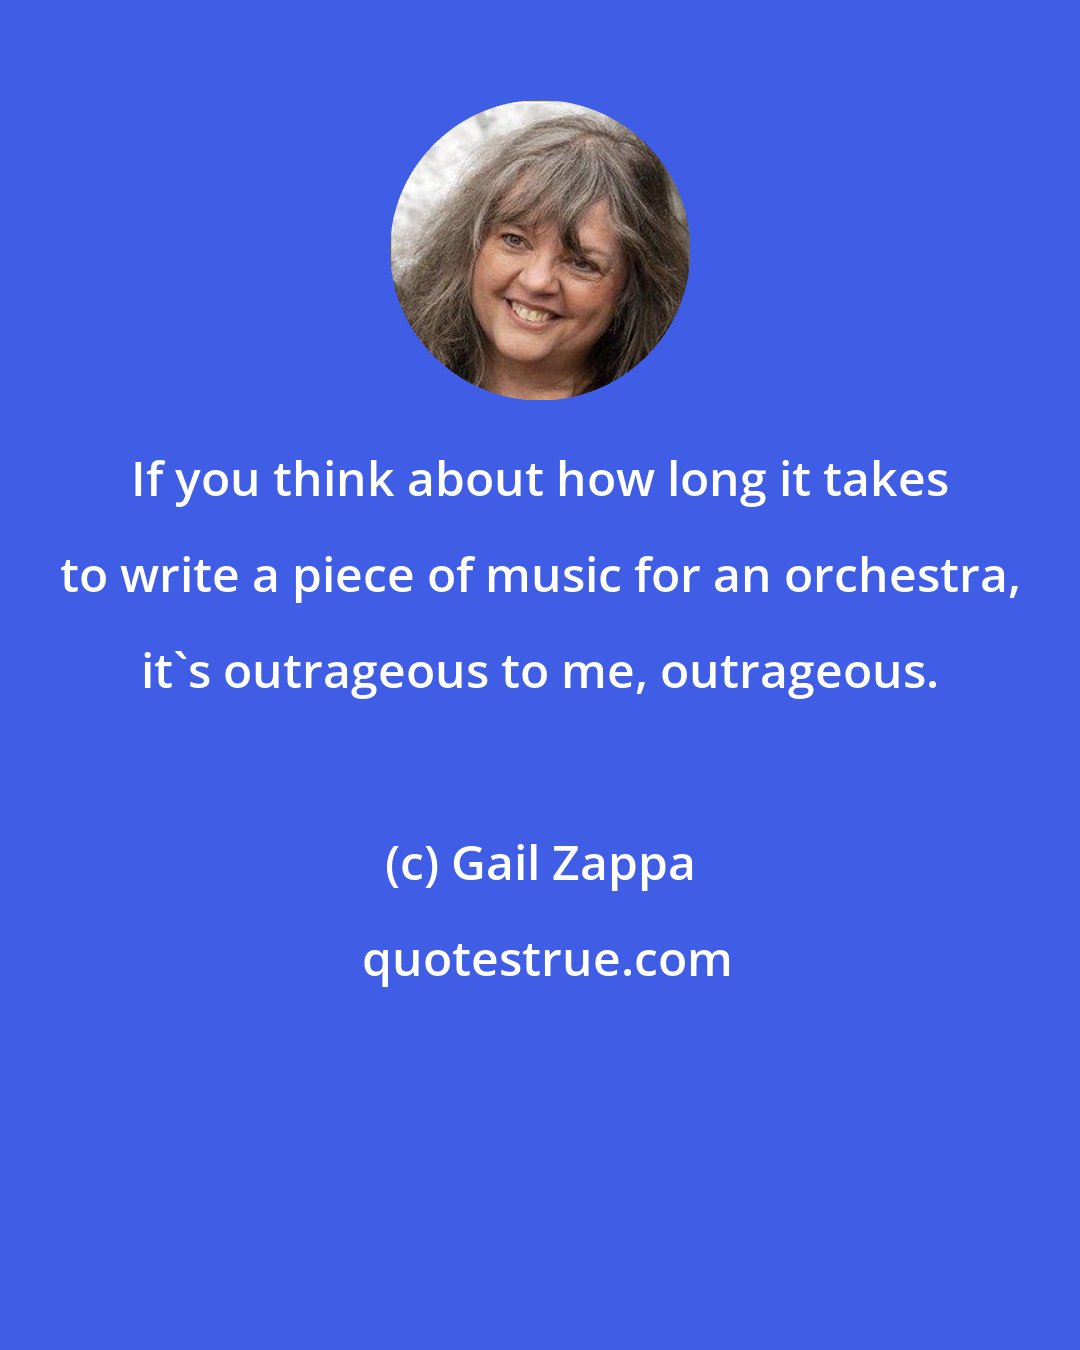 Gail Zappa: If you think about how long it takes to write a piece of music for an orchestra, it's outrageous to me, outrageous.